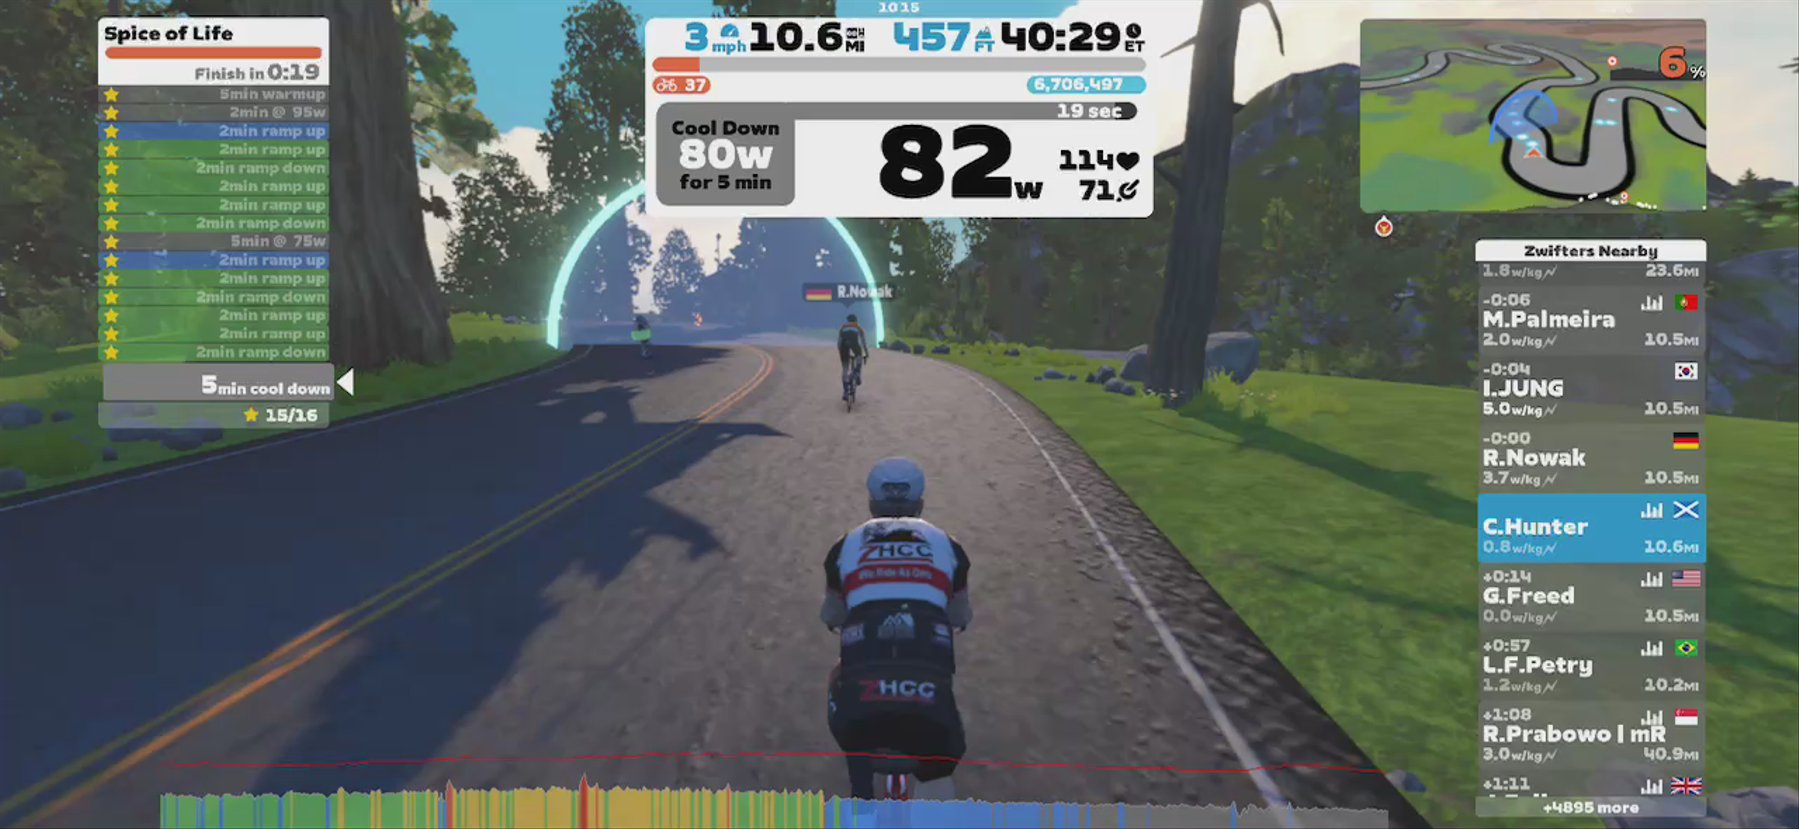 Zwift - Spice of Life in Watopia